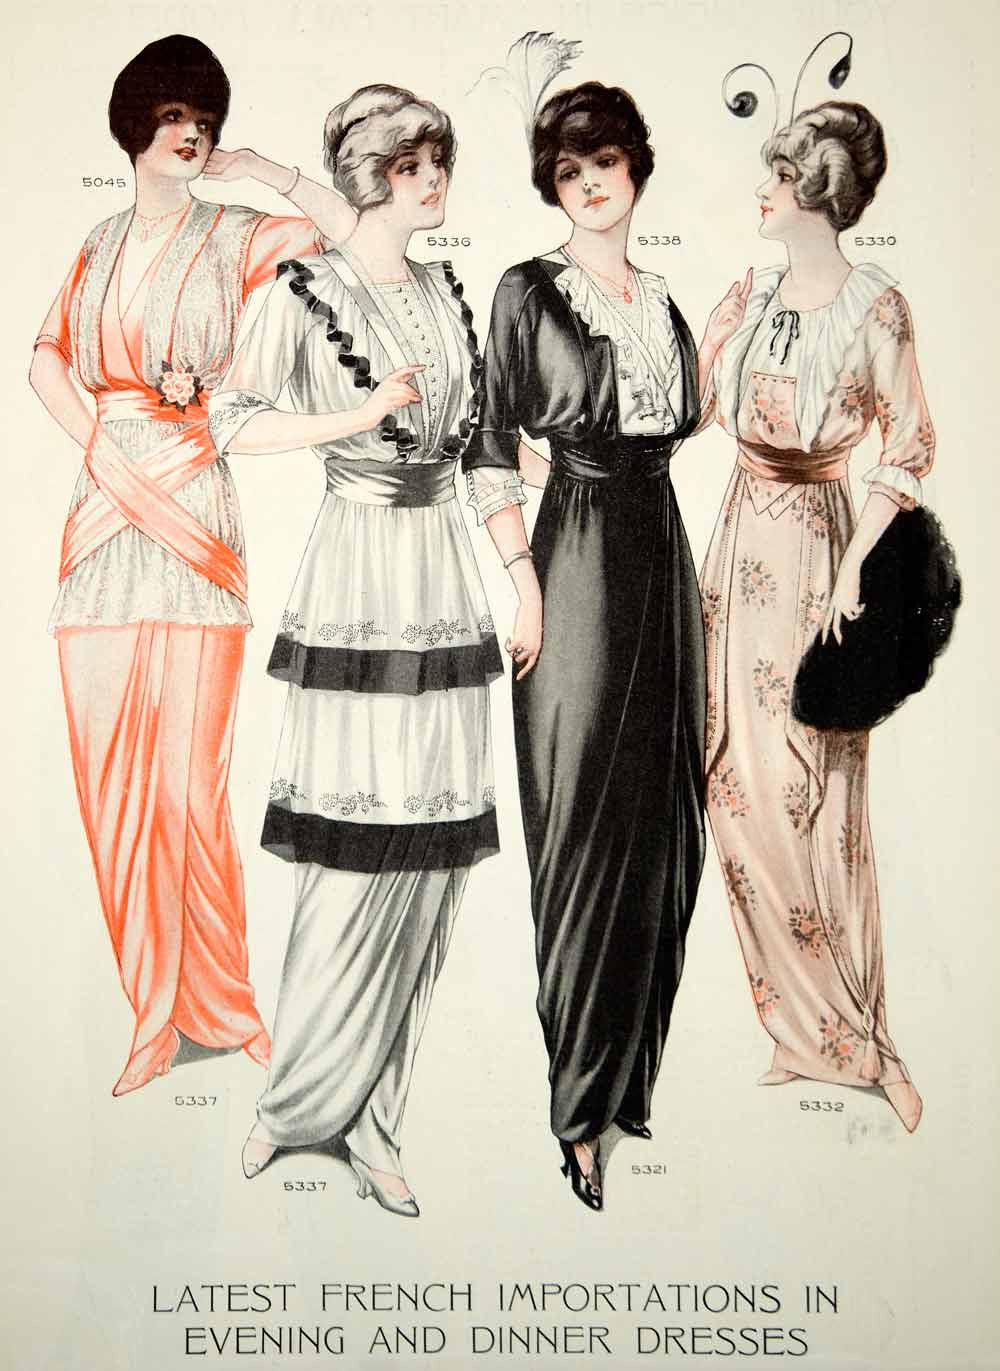 1913 Color Print Edwardian Fashion Illustration Evening Dinner Dress Gown Ladies - Period Paper
